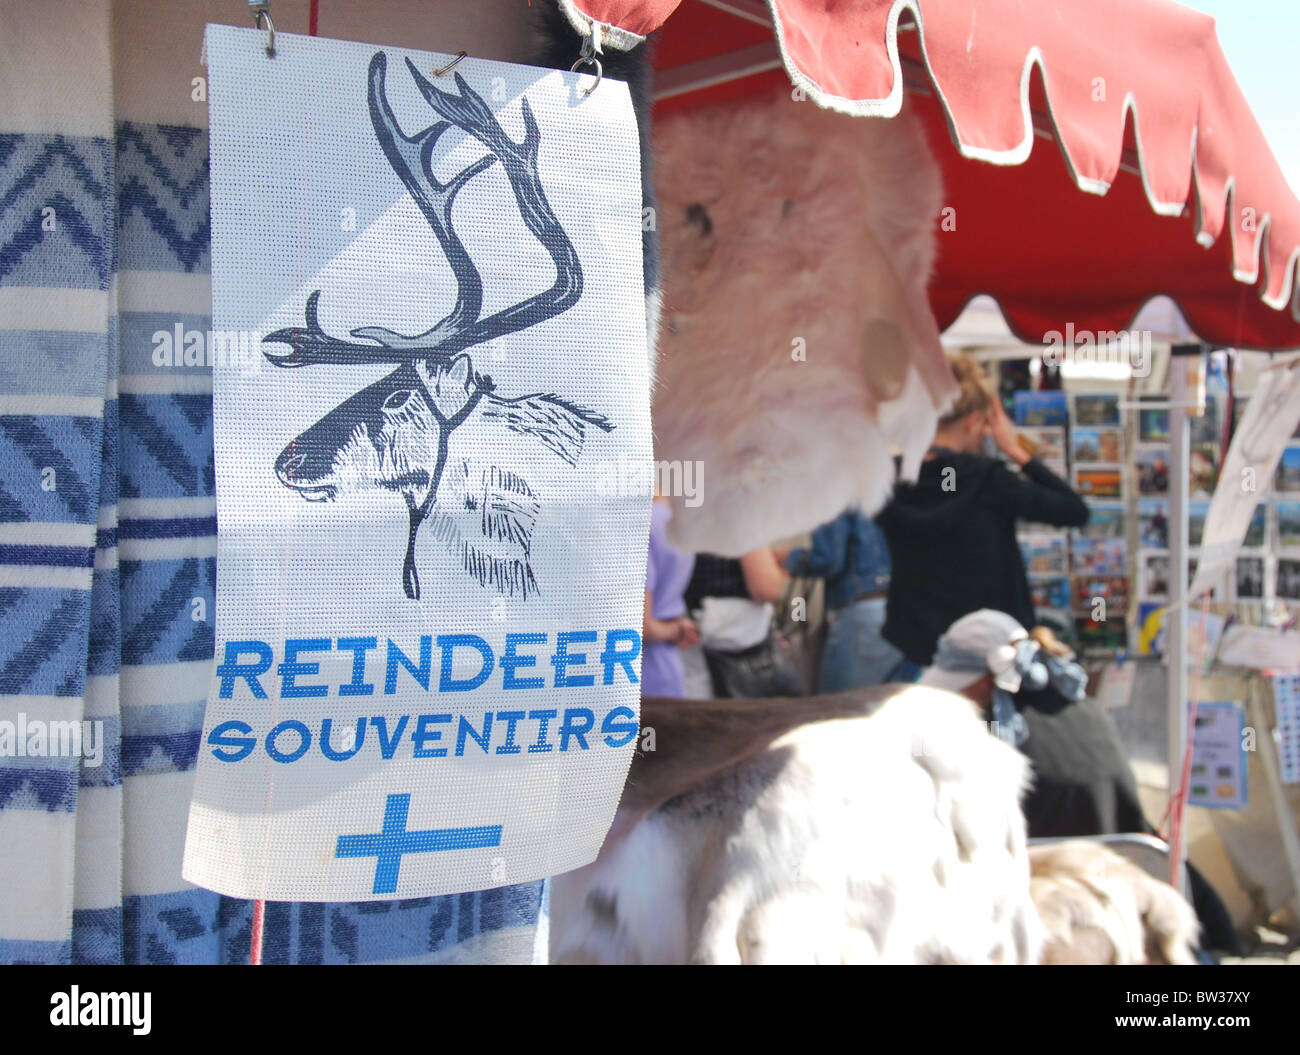 Reindeer souvenirs for sale at the Market Square (Kauppatori) in Helsinki, Finland. Stock Photo